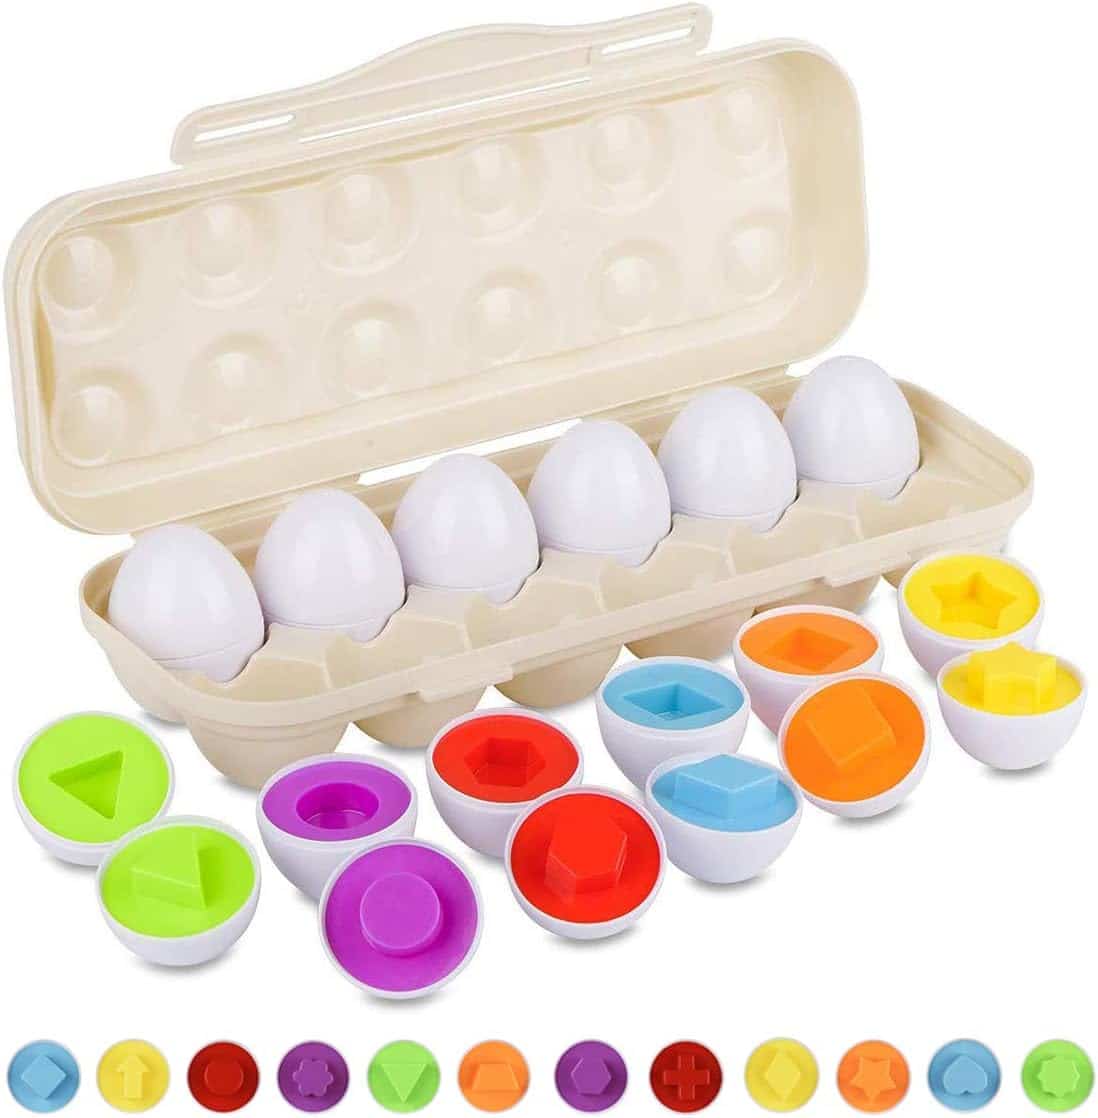 Hhyn Matching Eggs Set: A Fun and Educational Toy for Toddlers